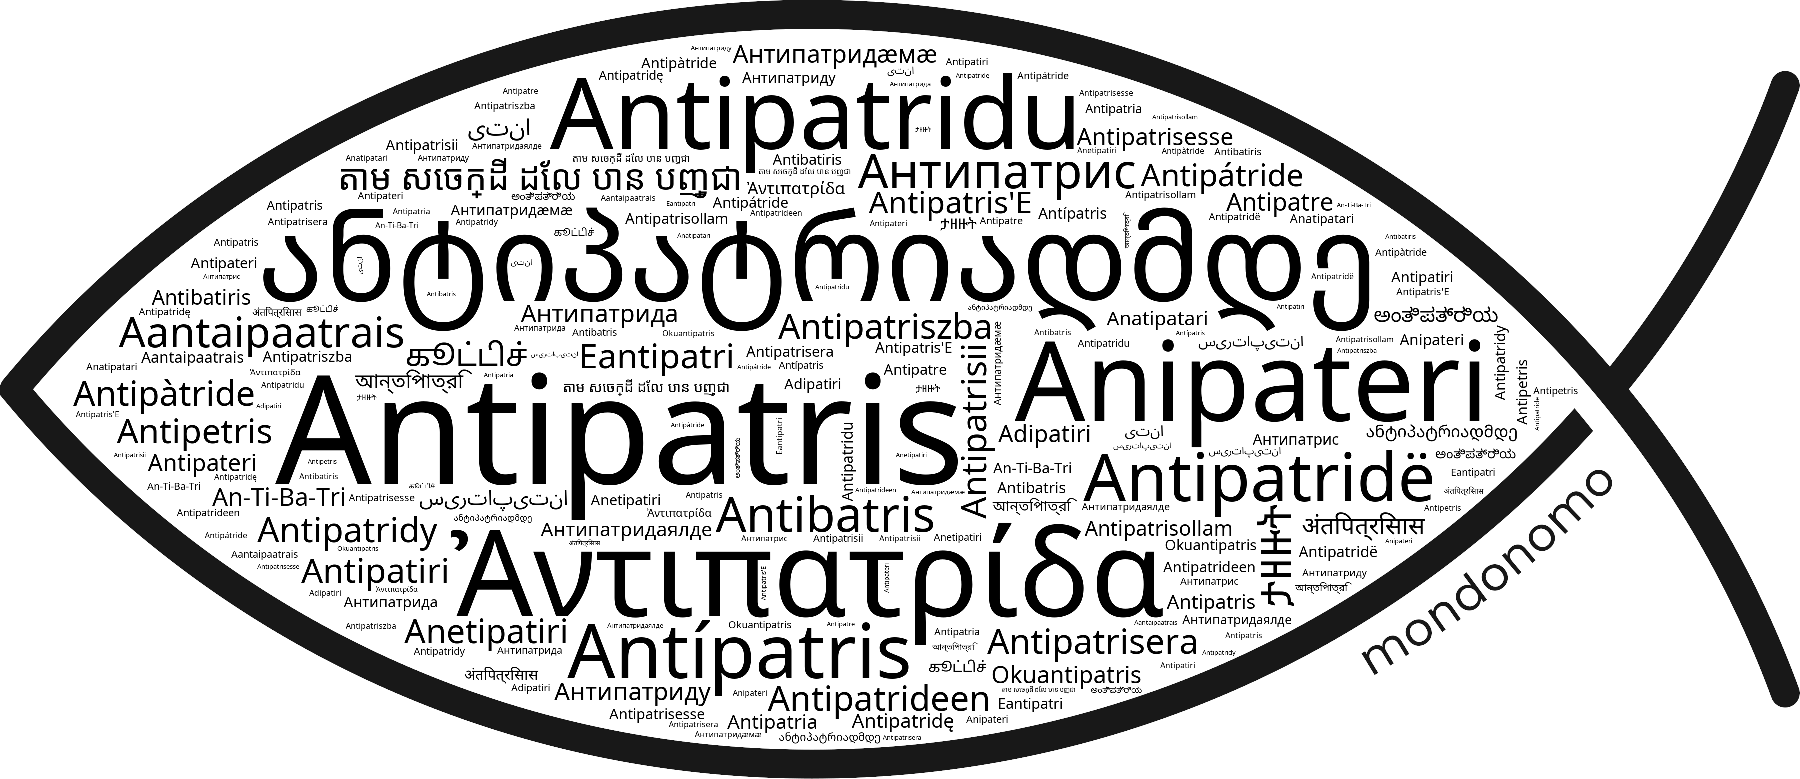 Name Antipatris in the world's Bibles